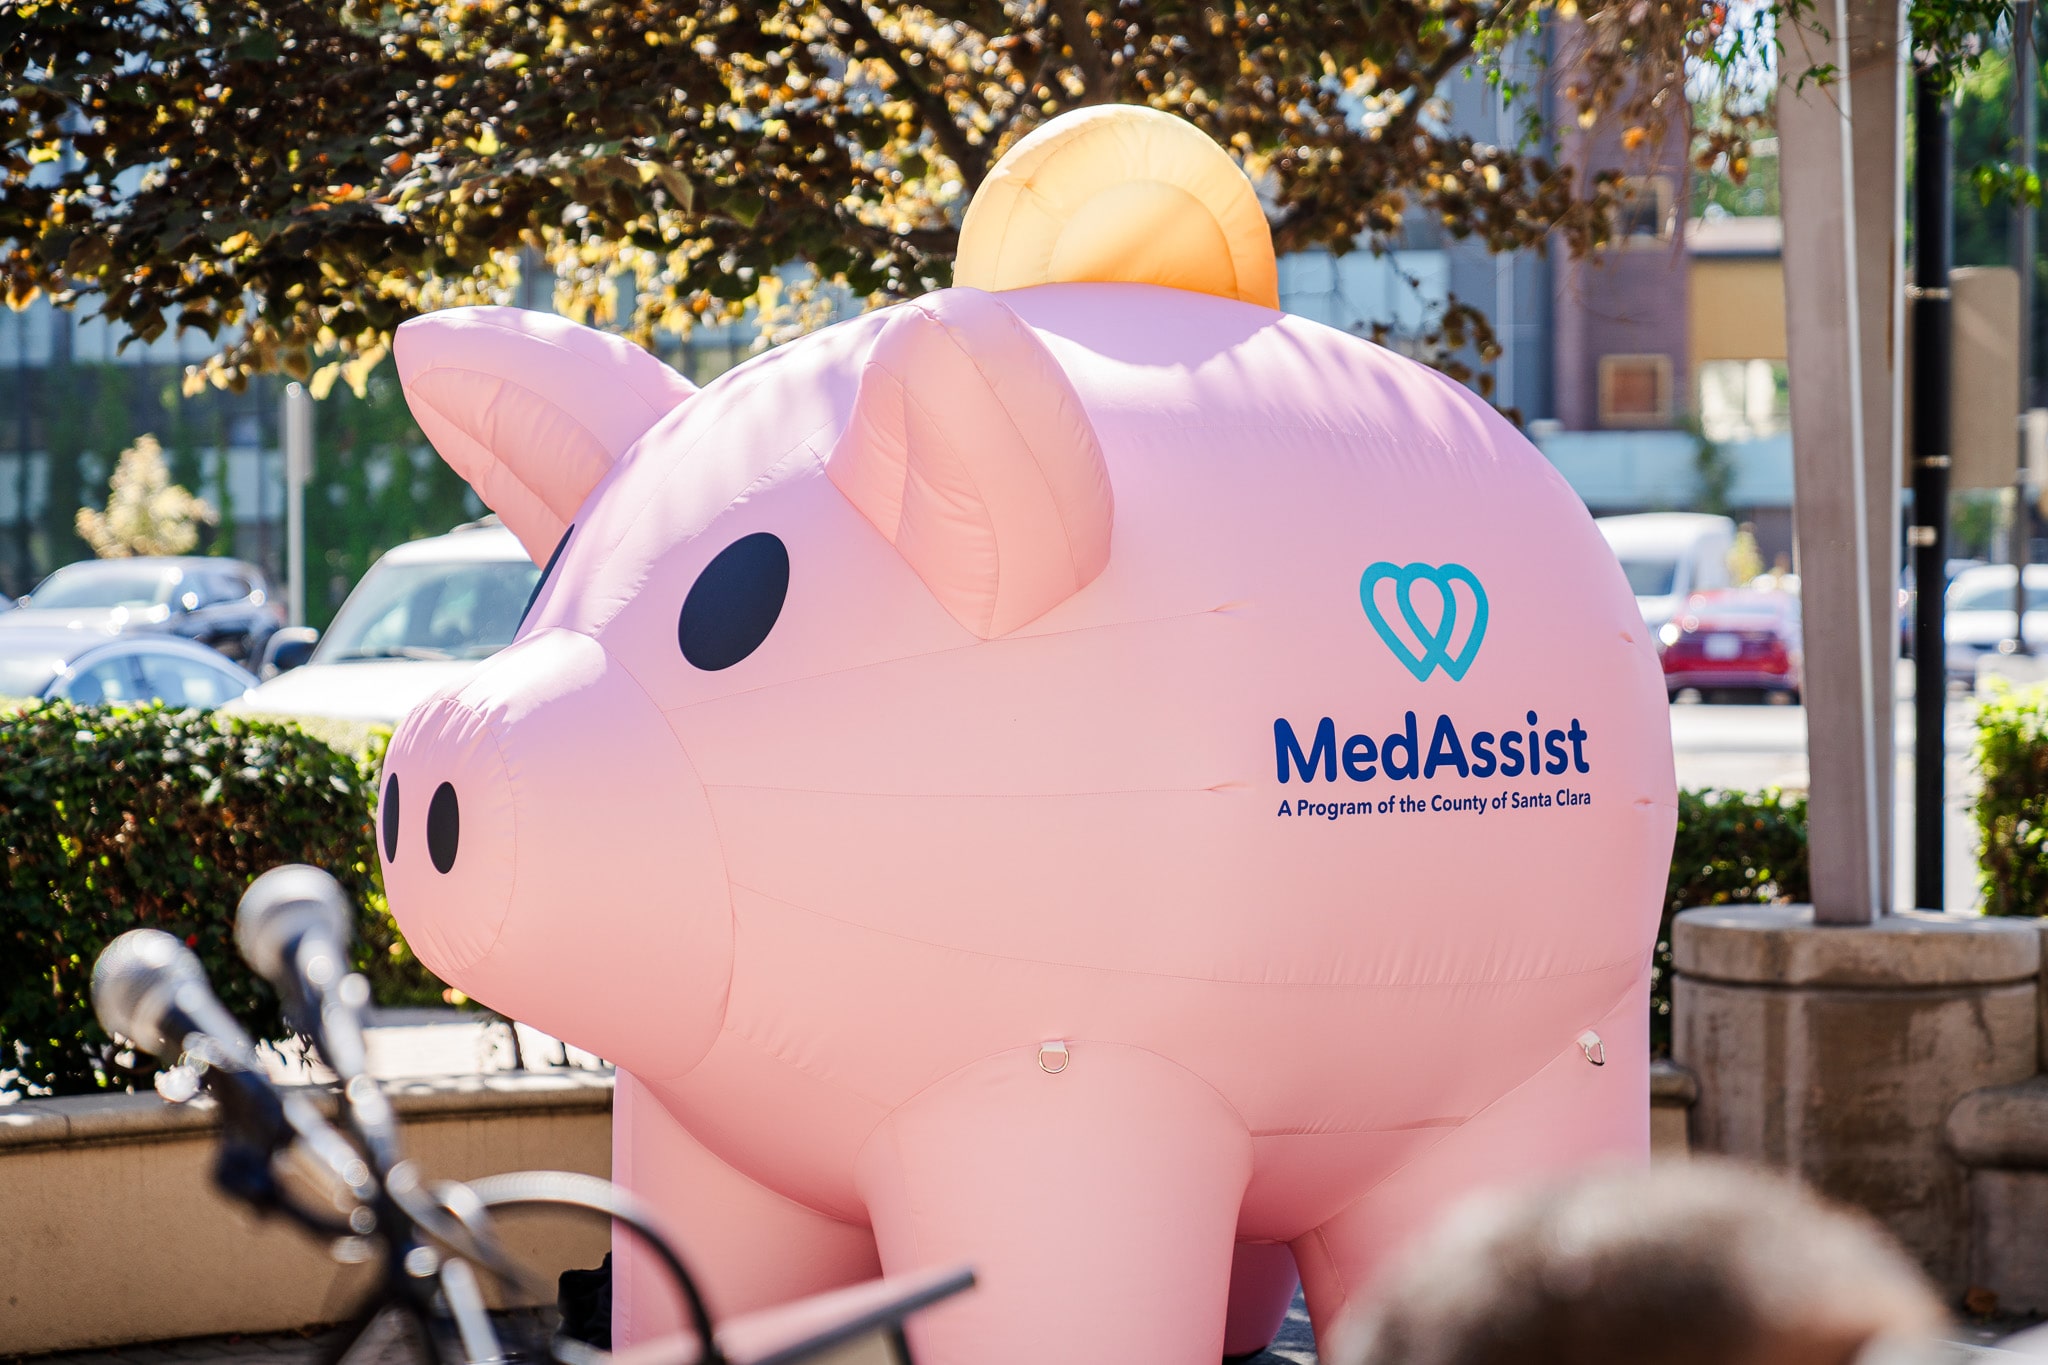 A life-size, inflatable rendition of MedAssist's mascot: A piggy bank.